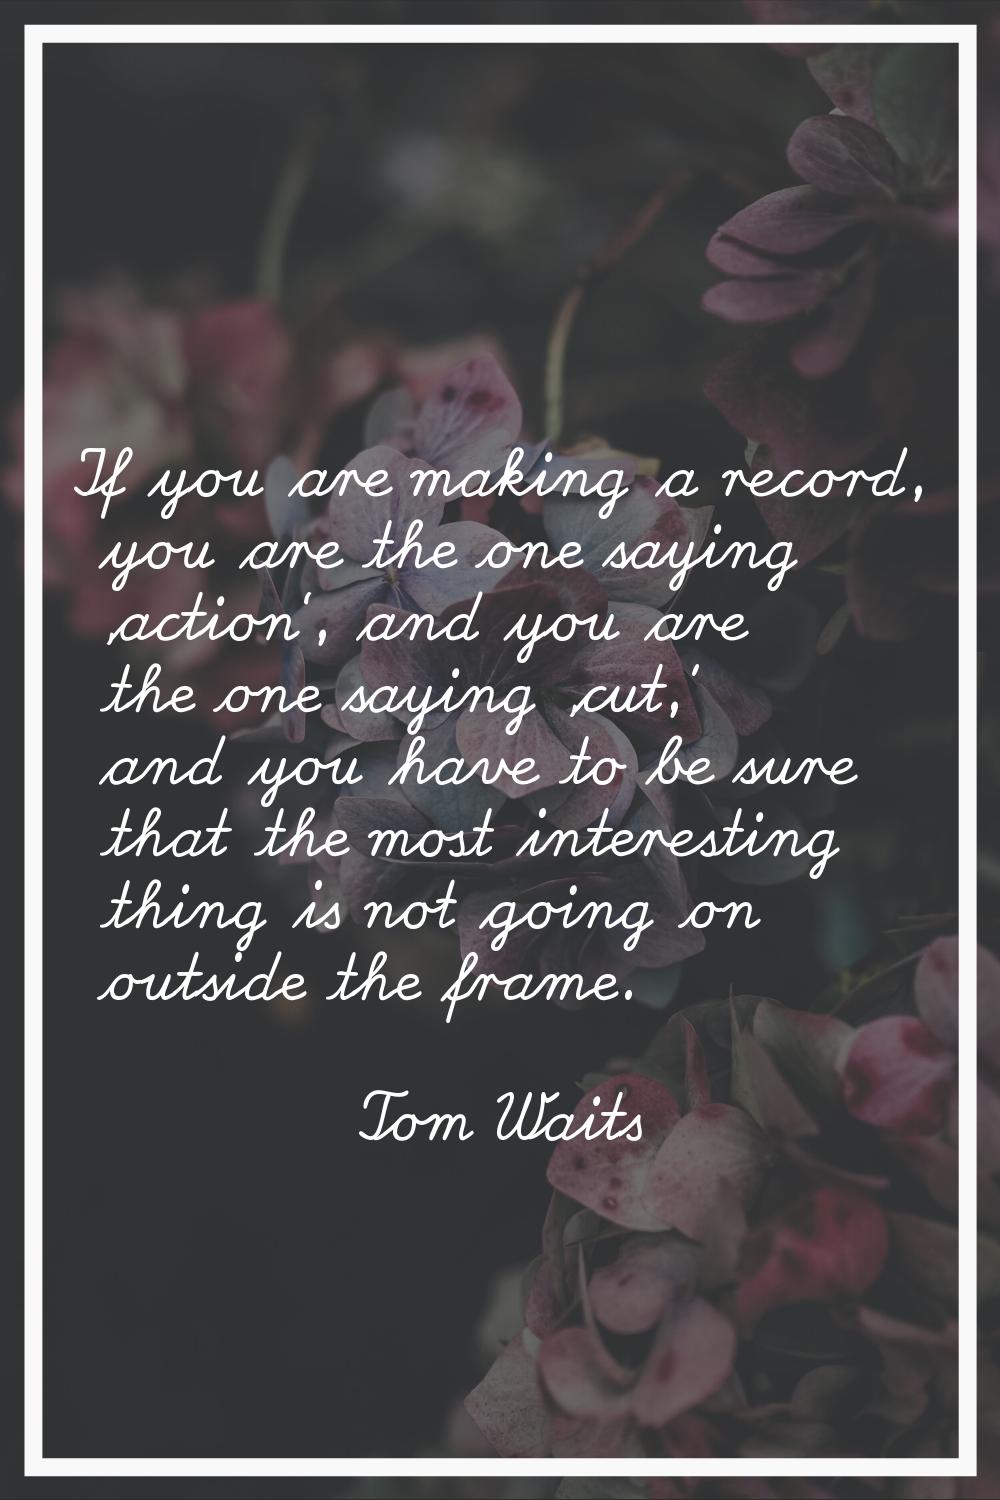 If you are making a record, you are the one saying 'action', and you are the one saying 'cut,' and 